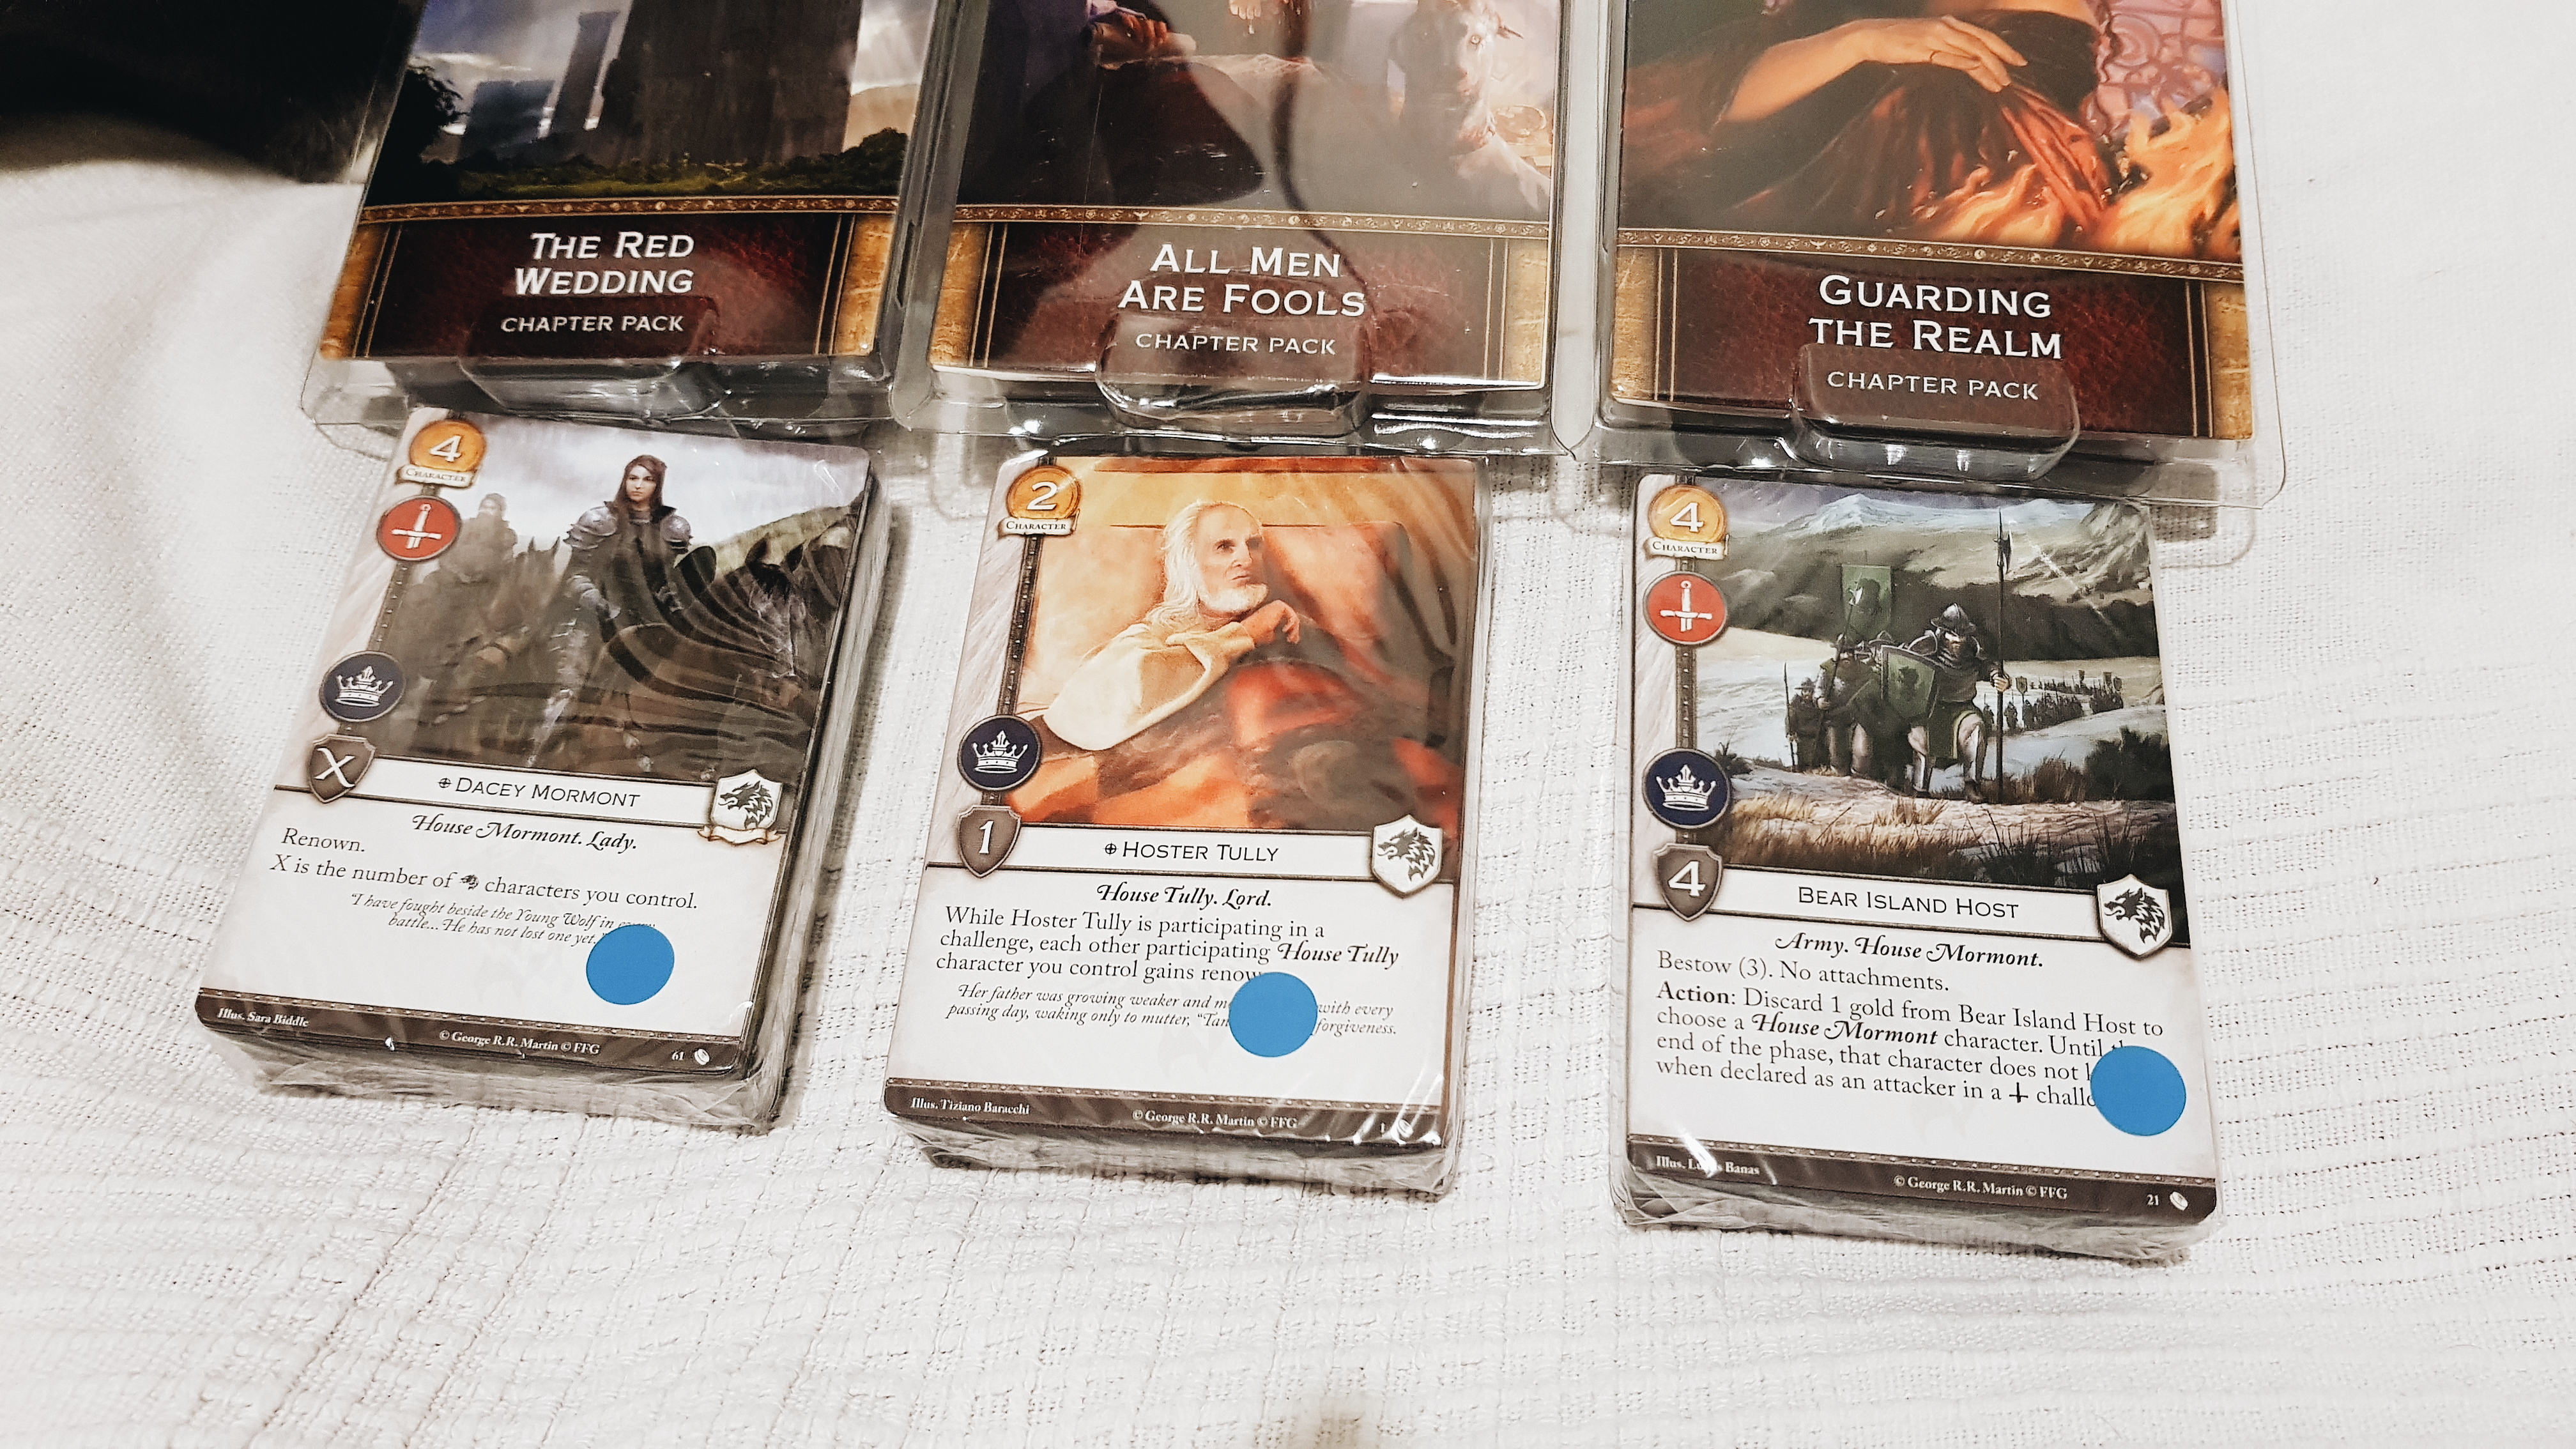 The Red Wedding, All Men Are Fools, and Guarding The Realm expansion packs for the Game of Thrones Card Game Second Edition